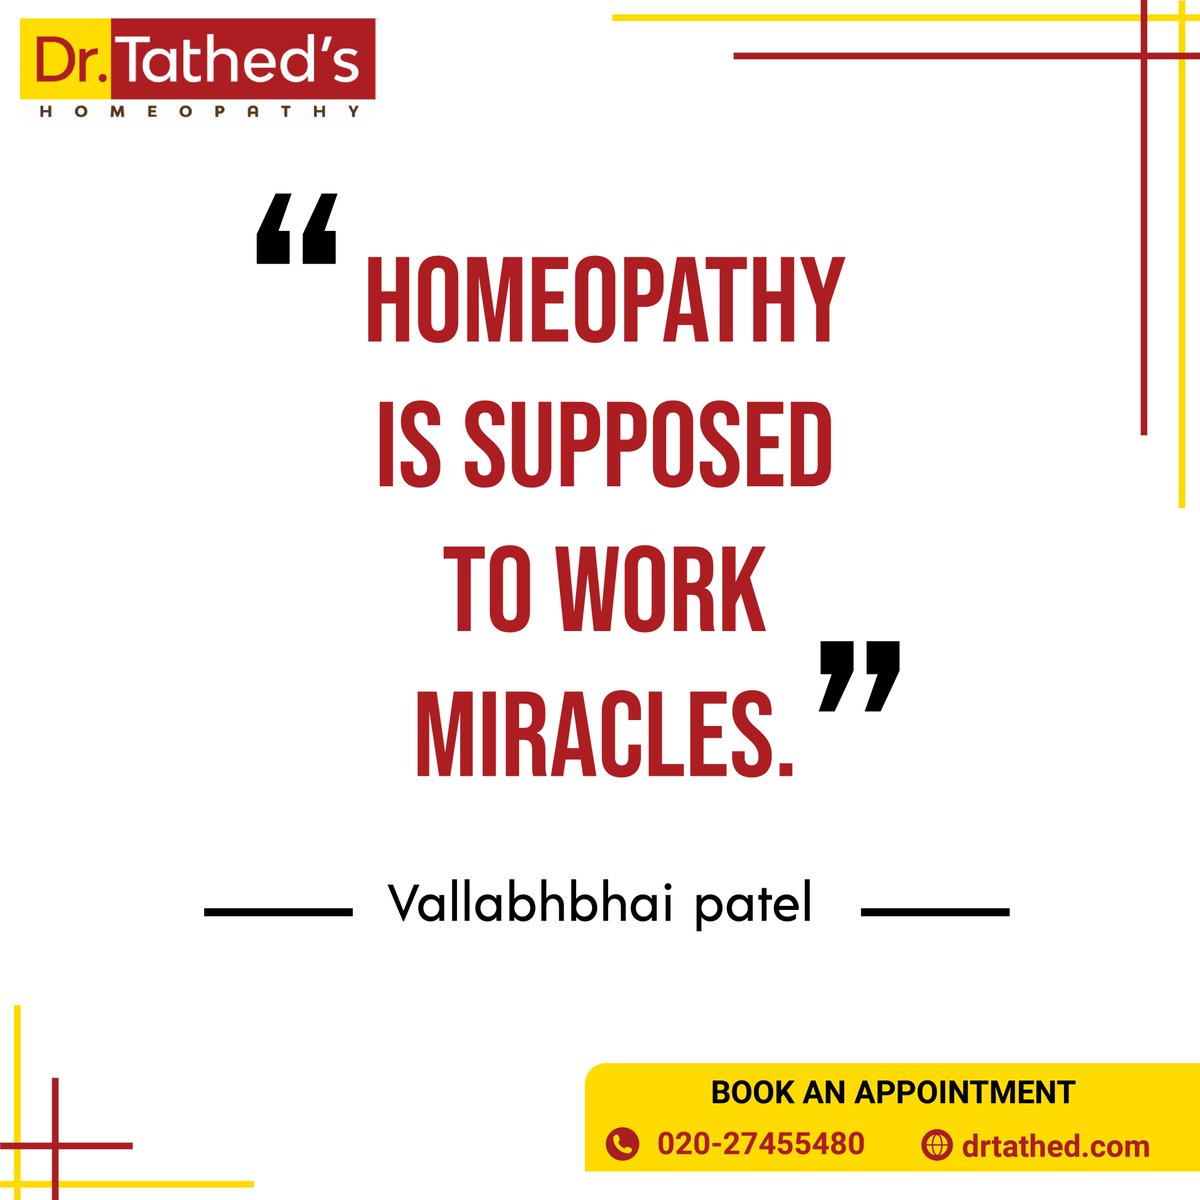 Homeopathy is supposed to work miracles
- Vallabhbhai Patel

#homeopathy #homeopathicmedicine #homeopathic #health #medicine #homeopath #doctor #wellness #naturalmedicine #pune #diabetes #yogabenefits #skinproblem #skinproblemsolution #skinallergy #asthma